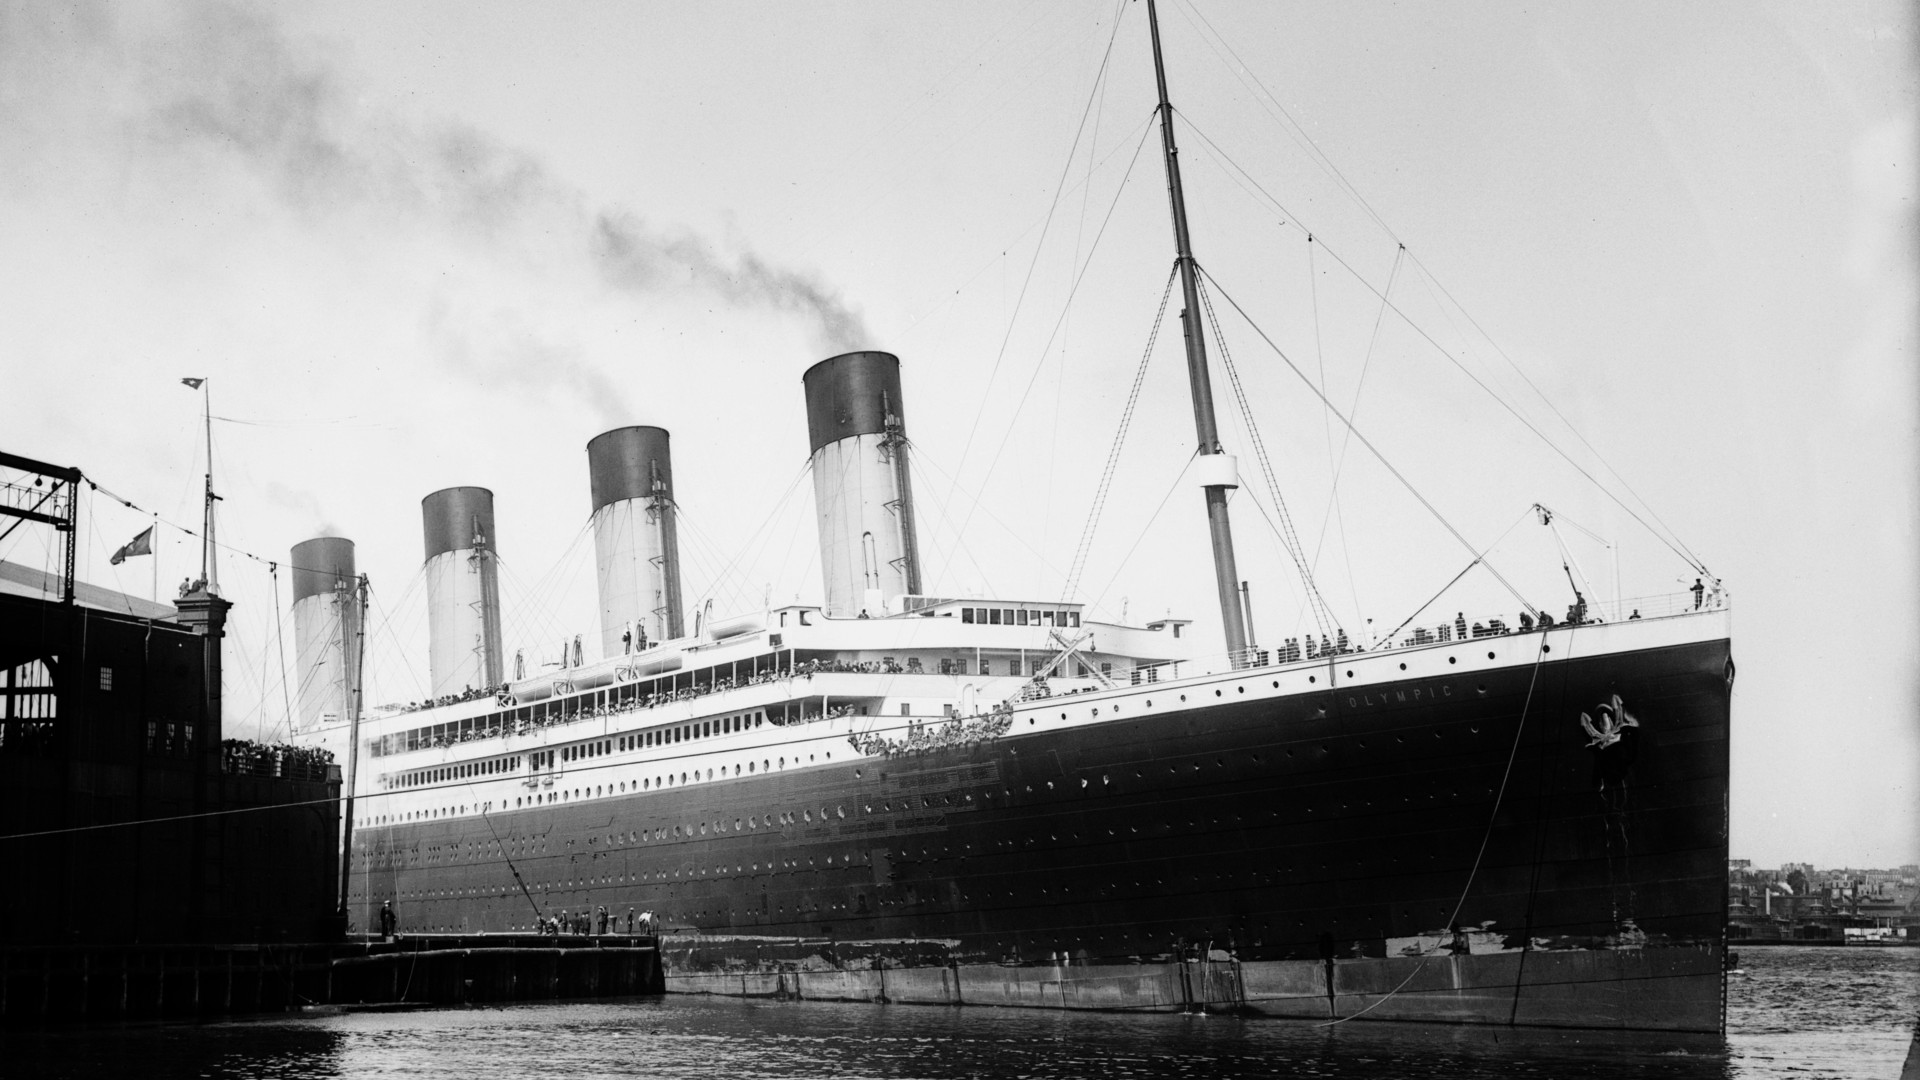 3 Rms Titanic HD Wallpapers Backgrounds - Wallpaper Abyss